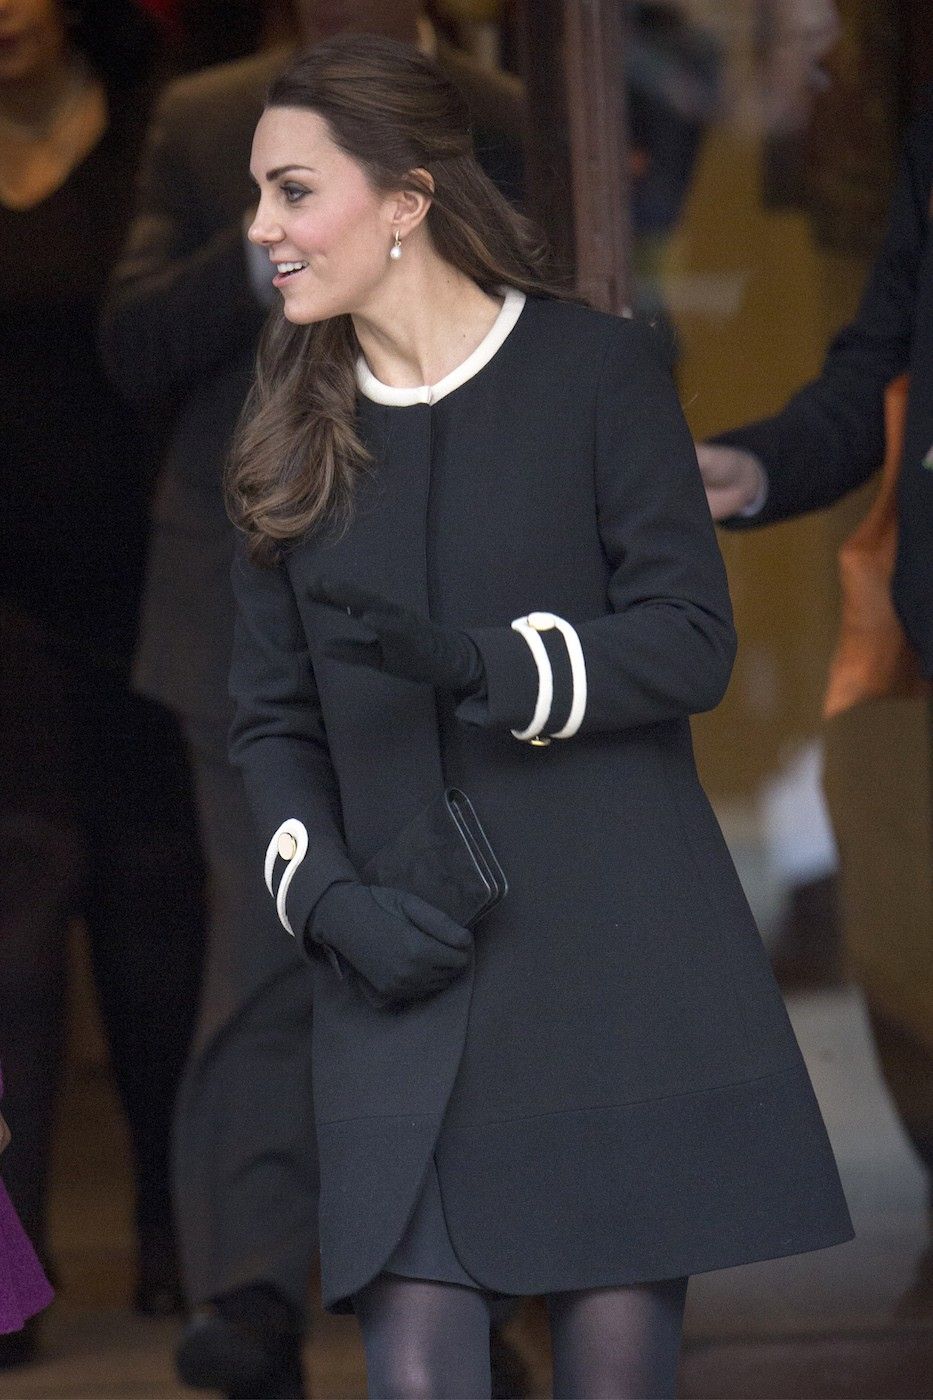 Britains Catherine, Duchess of Cambridge is greeted after an event at the Northside Center for Child Development in the Harlem section of New York,